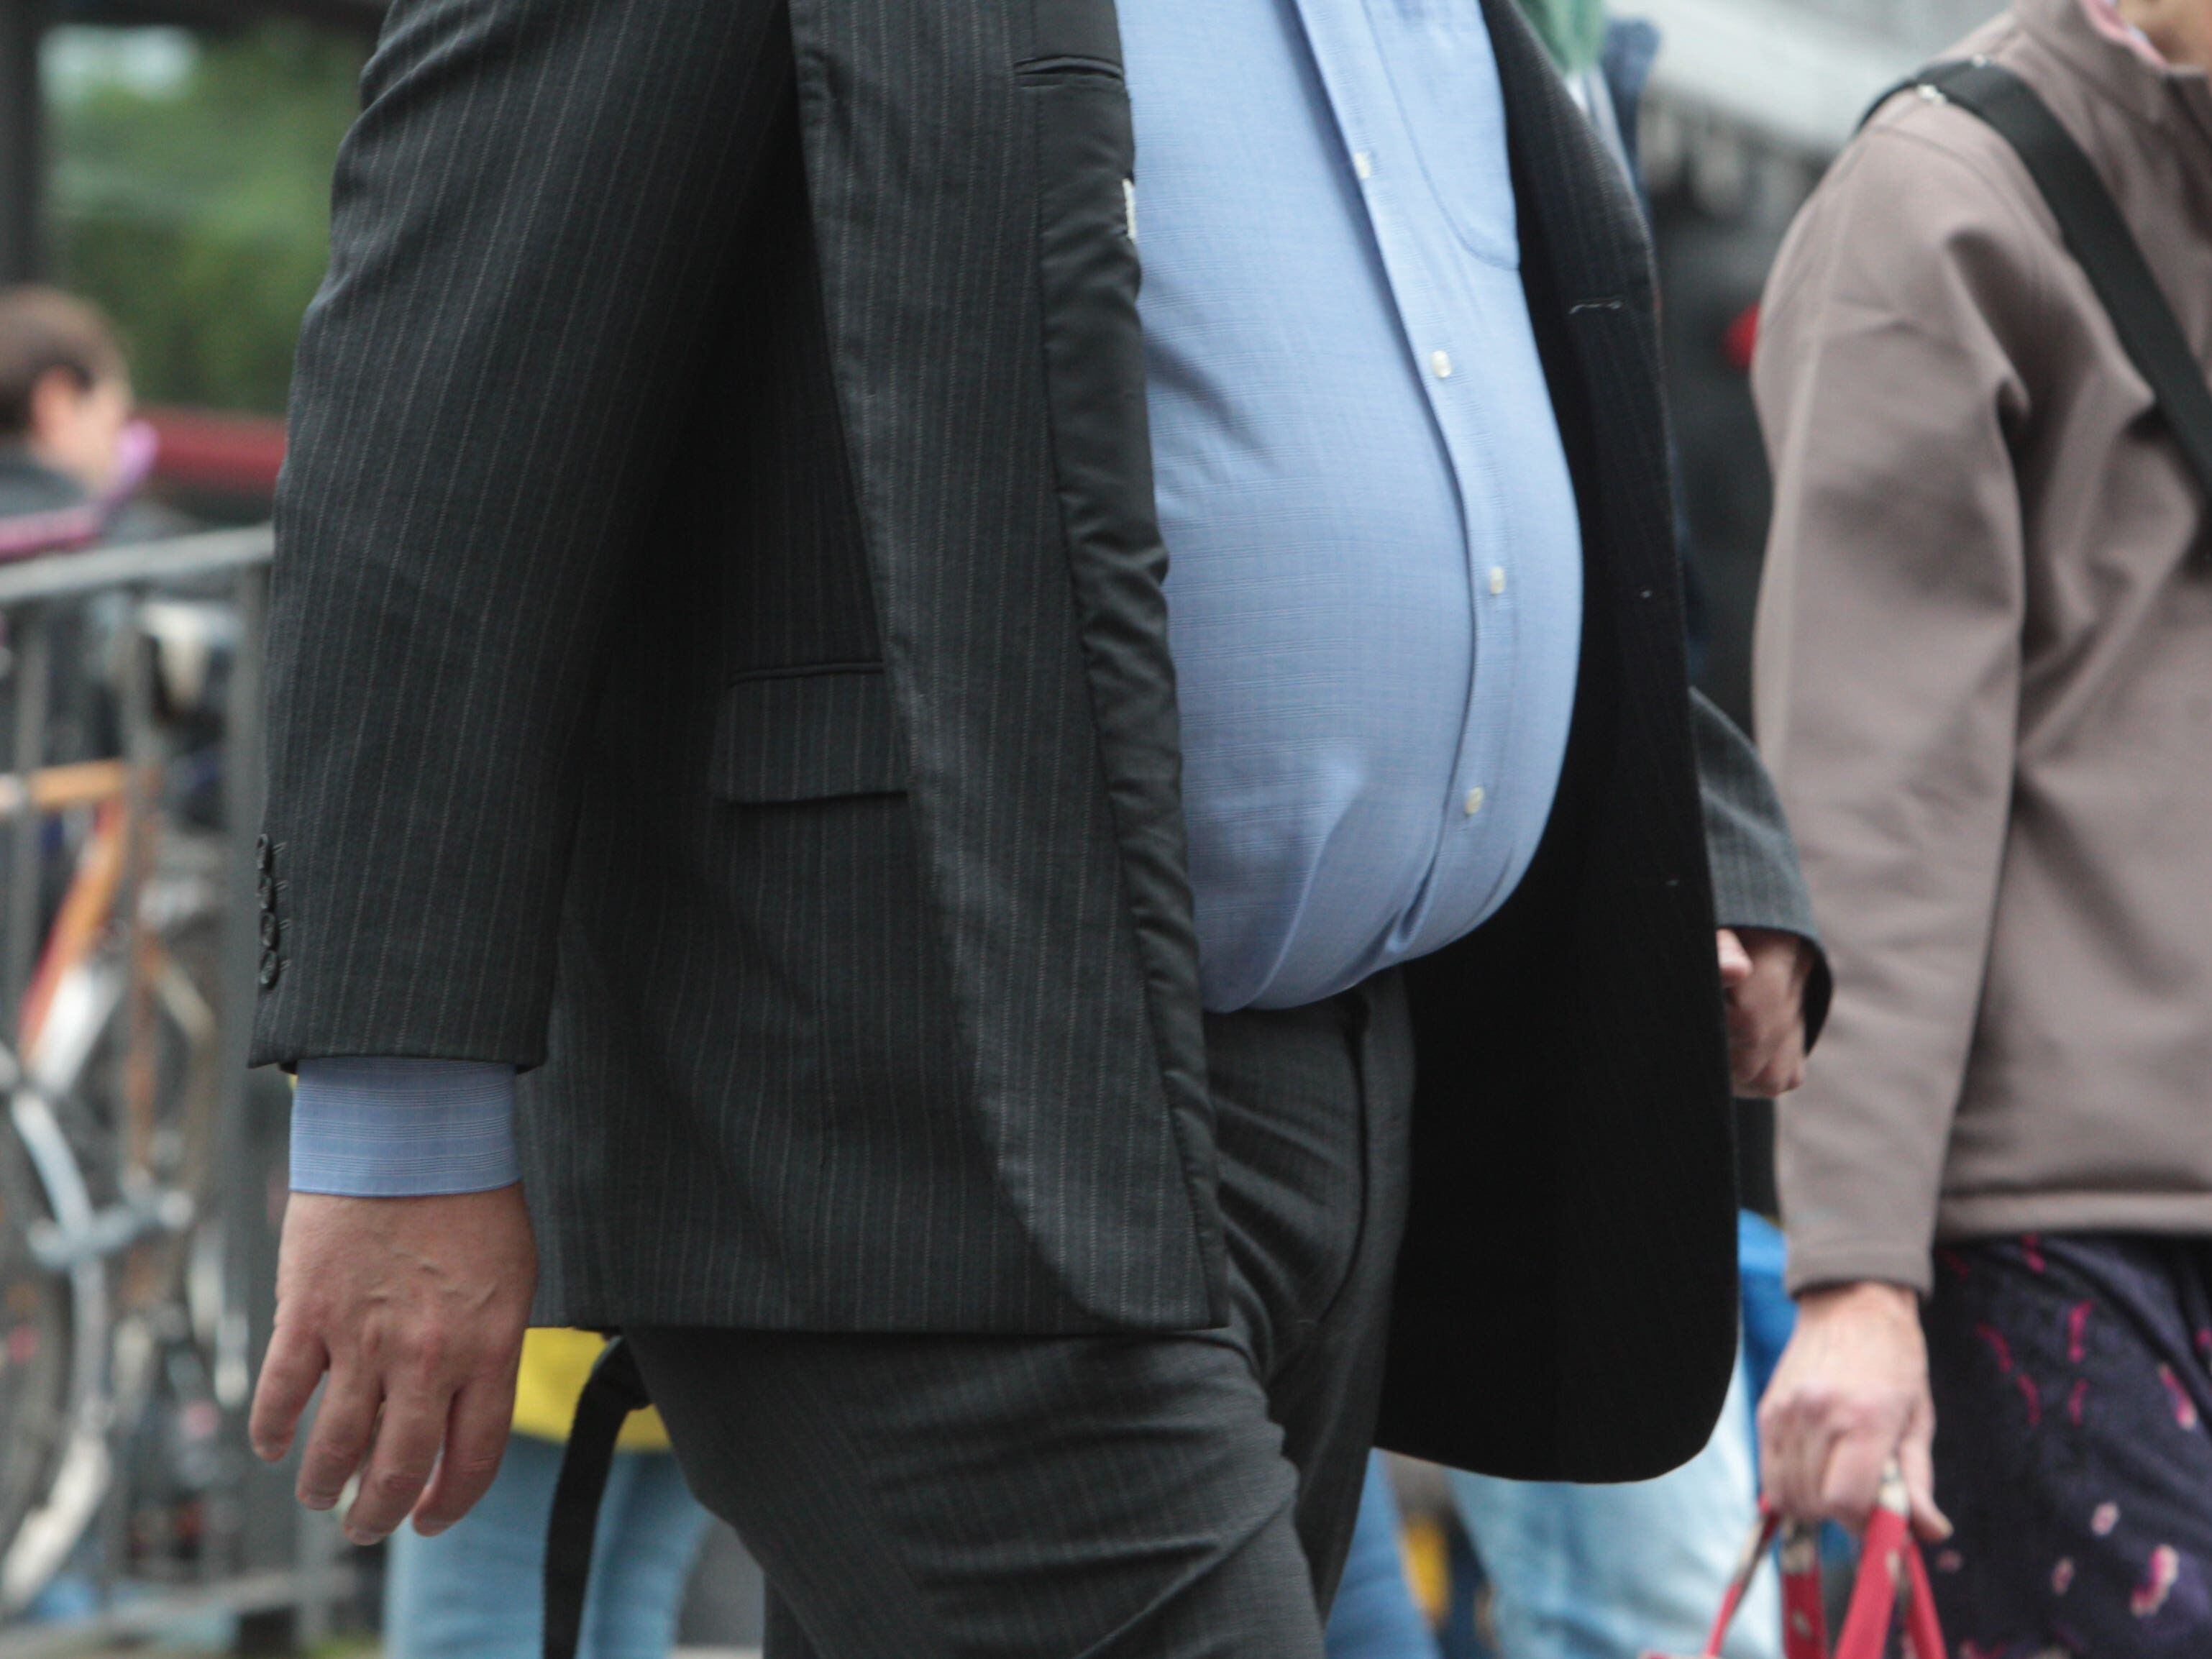 Heart disease decline in under-60s ‘stalled due to obesity and lack of exercise’